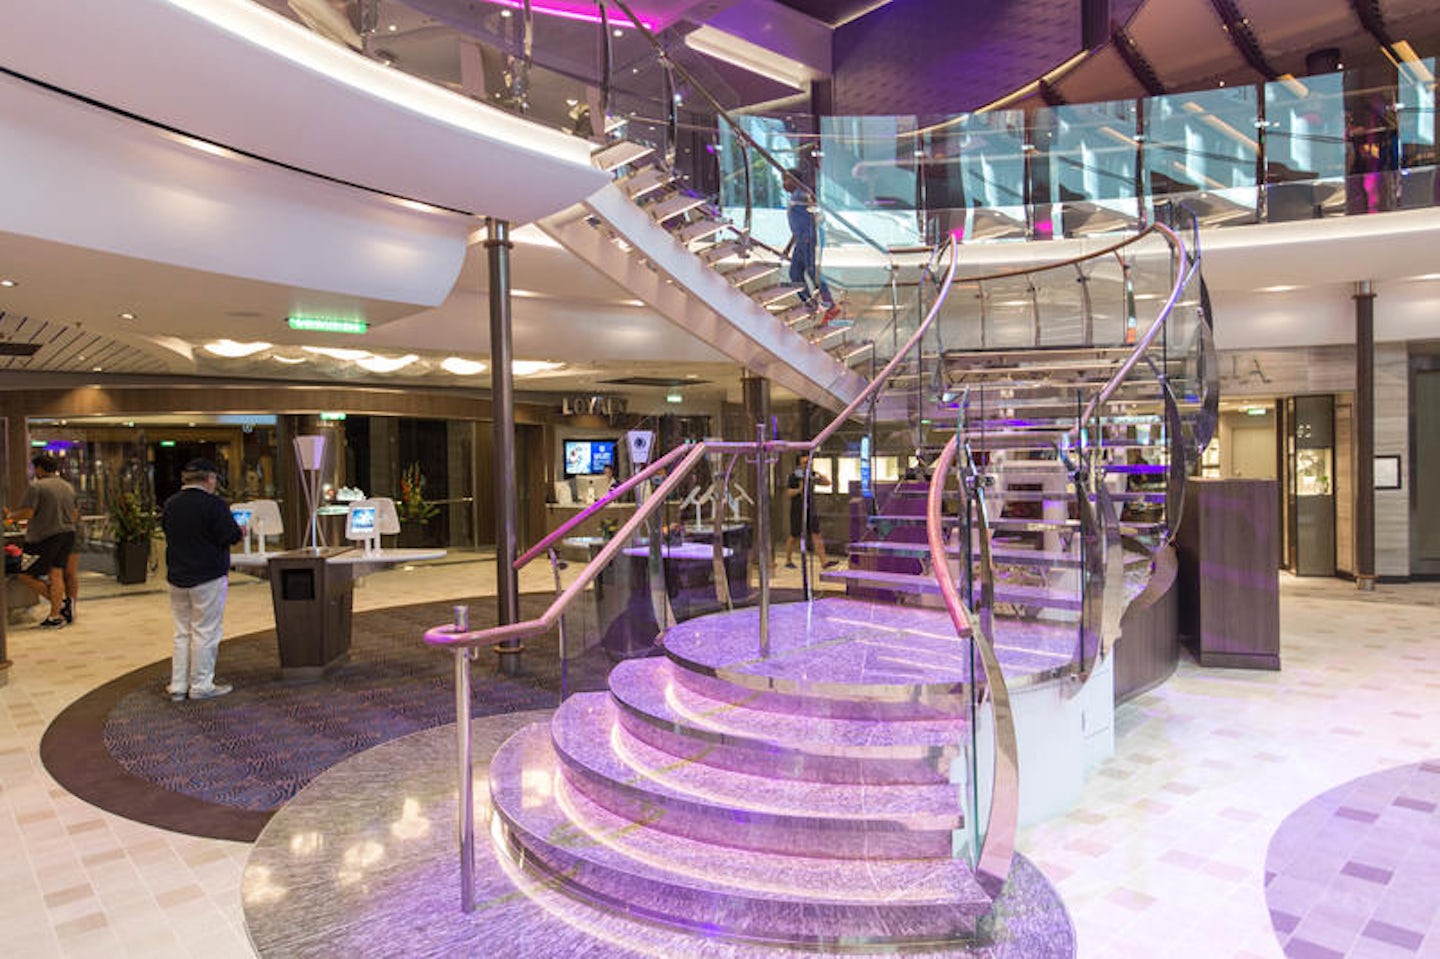 Stairs on Harmony of the Seas